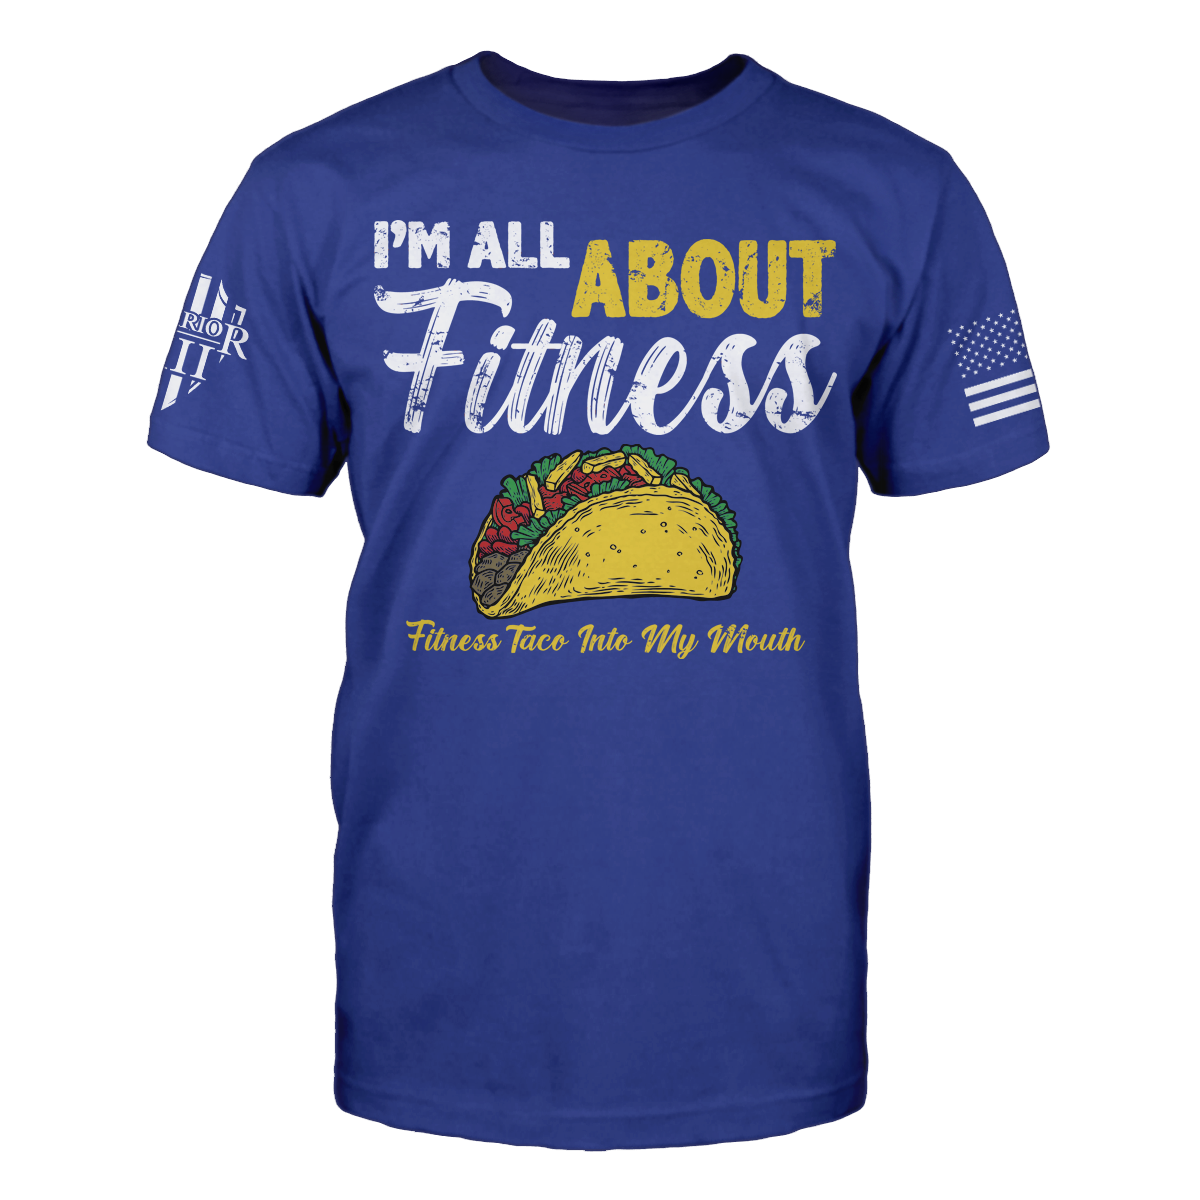 A blue t-shirt with the words 'I'm all about fitness - fitness taco into my mouth" printed on the front. The back of the shirt has no printing.